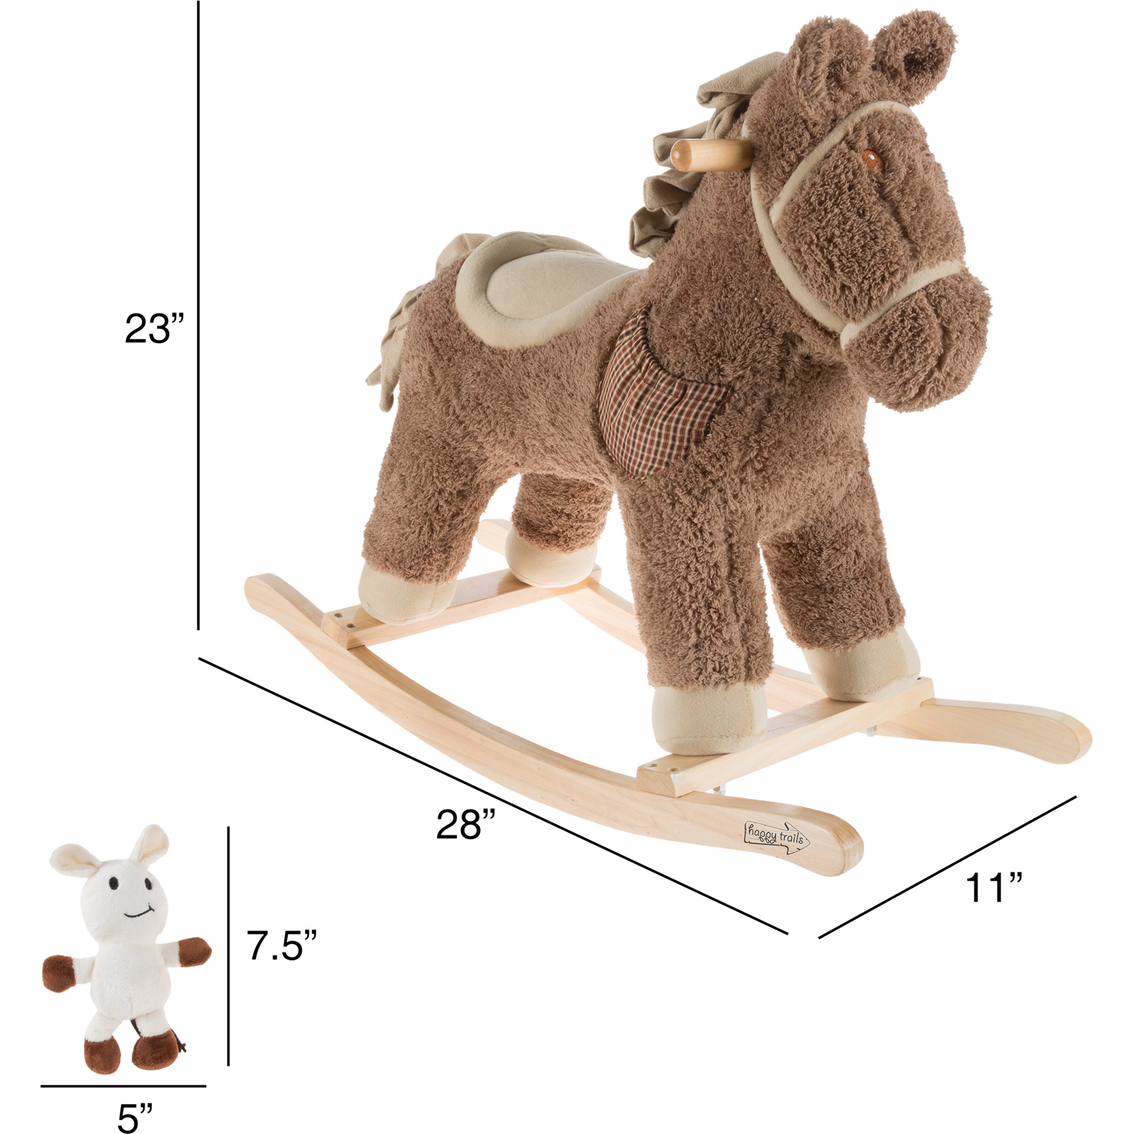 Happy Trails Rocking Horse with Removable Friend - Image 2 of 9